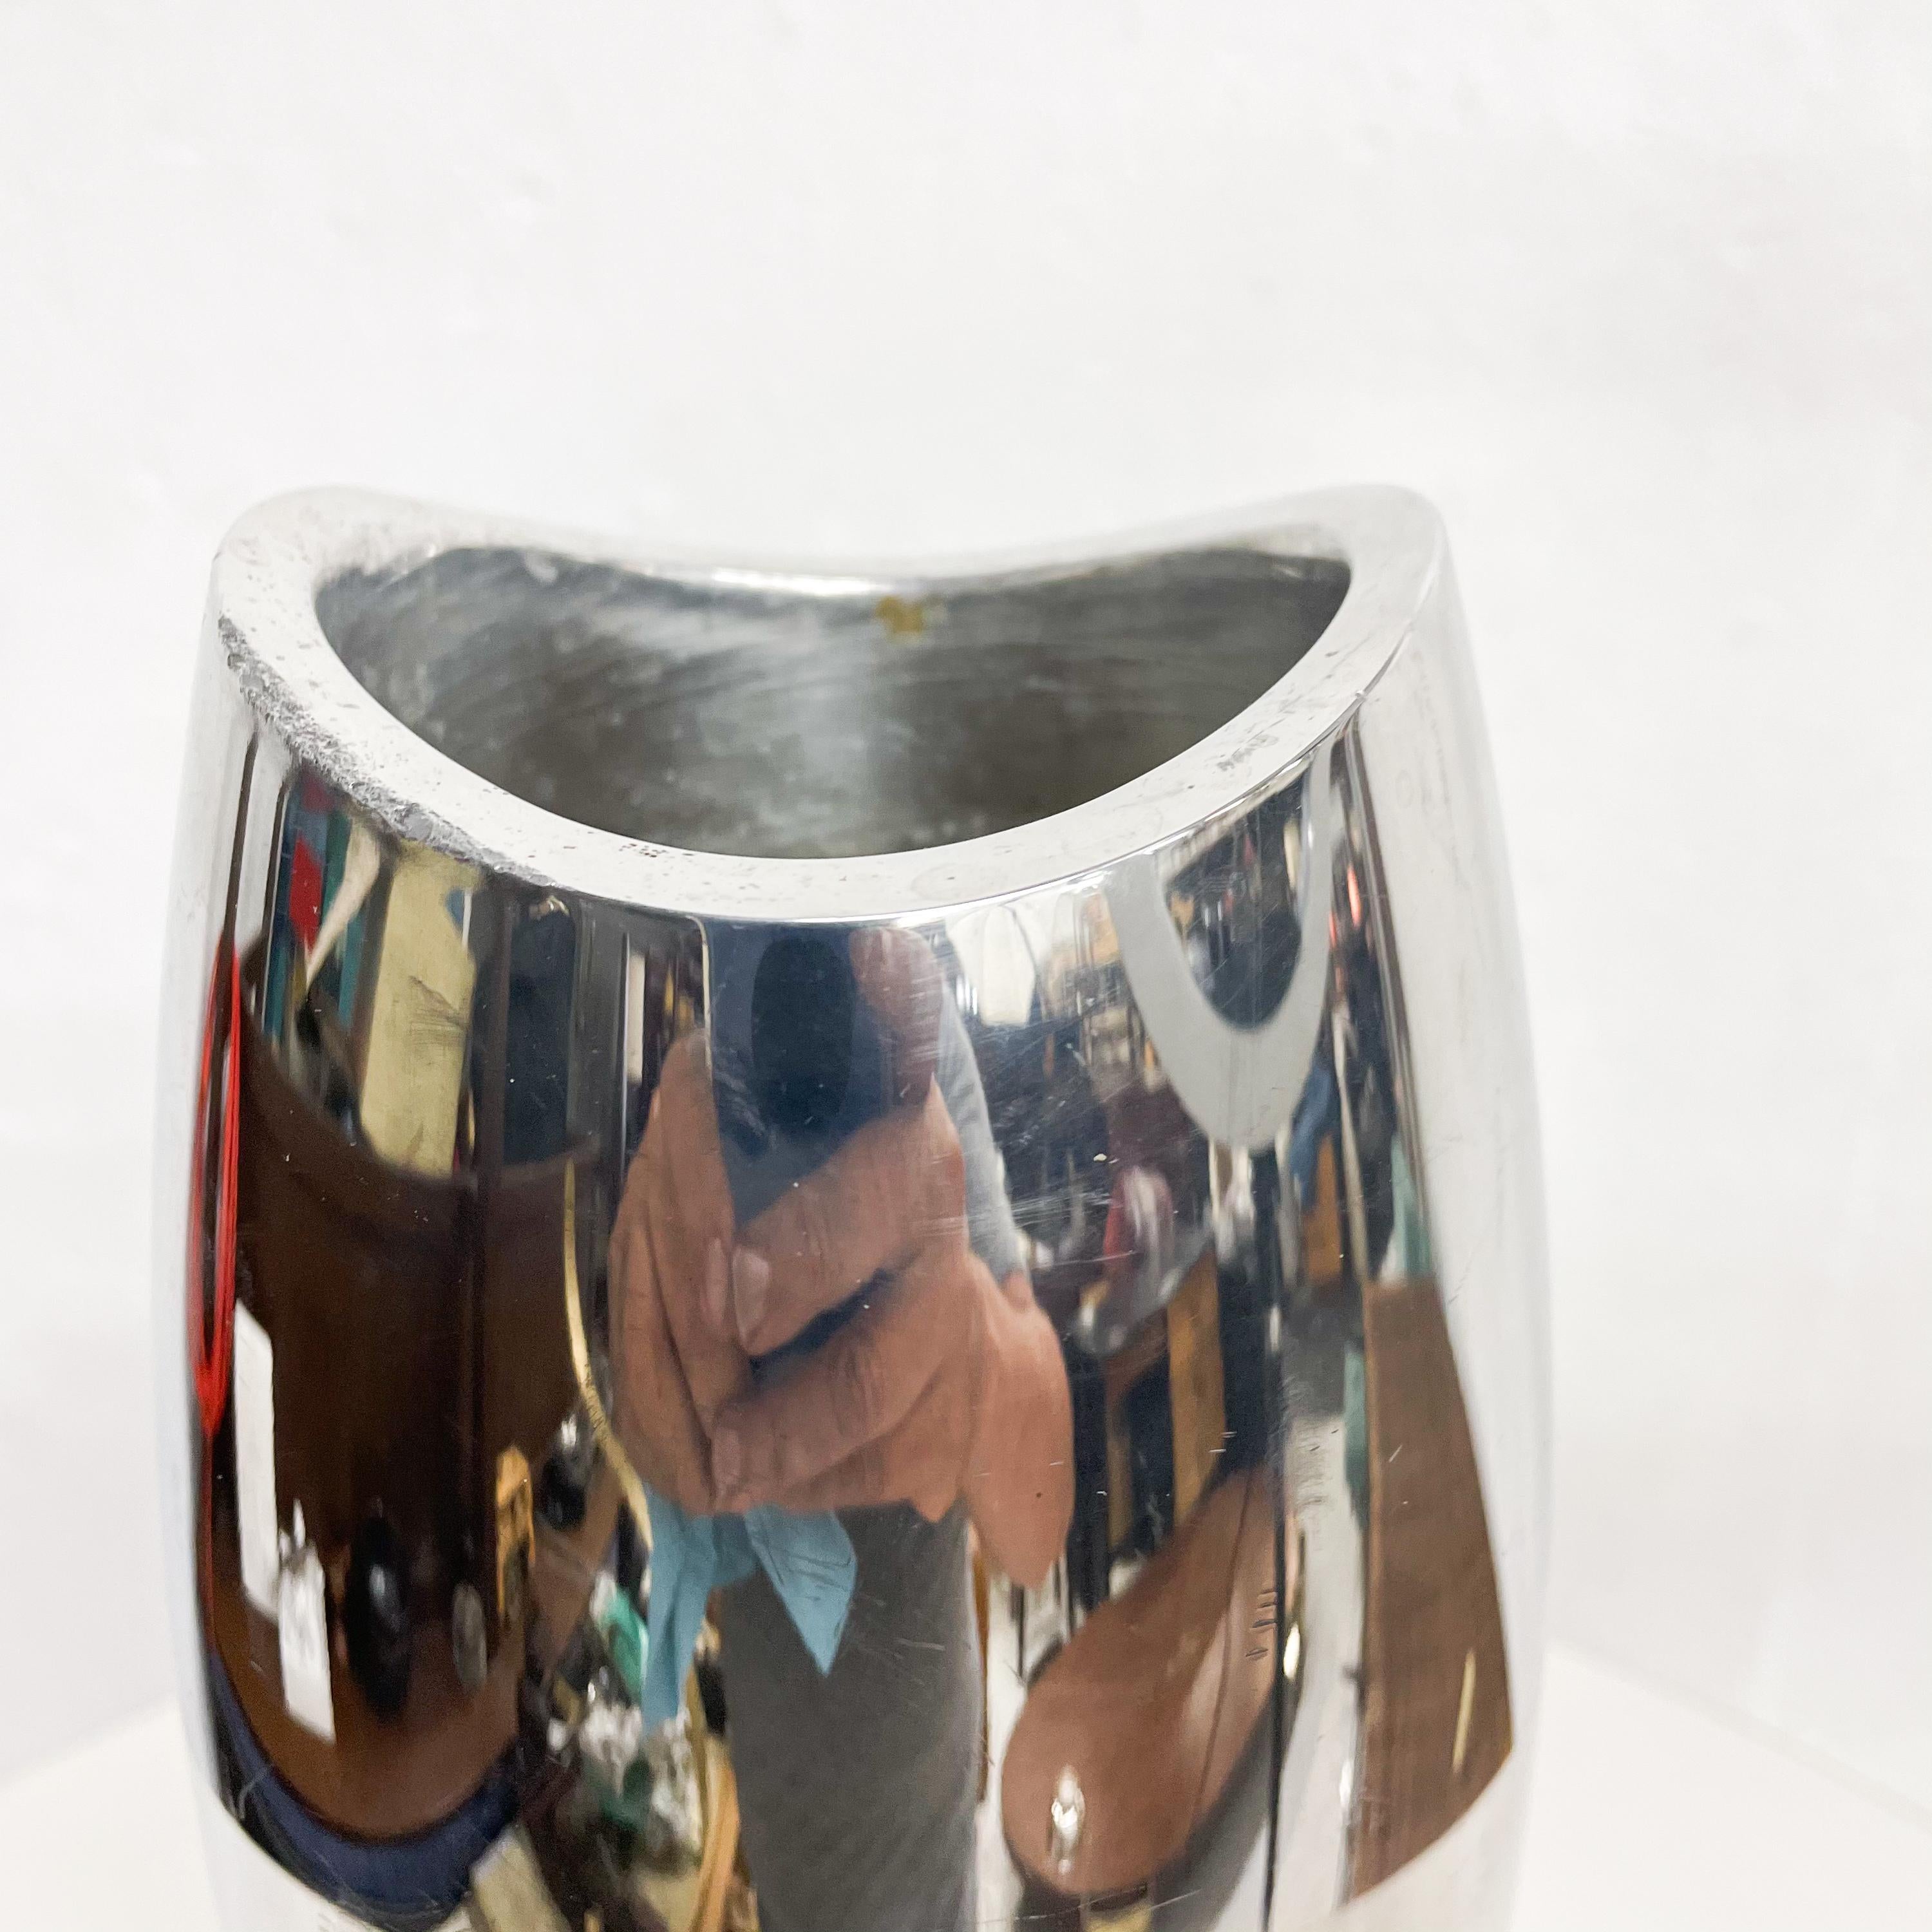 For your pleasure: Nambe studio aluminum vase model 6062 by Karim Rashid 1994
Nambe Studio cylindrical vase finished in the Nambe signature silver metal alloy.
Vase has incised signature of the designer on underside.
Measures: 12.75 tall x 4.5 in